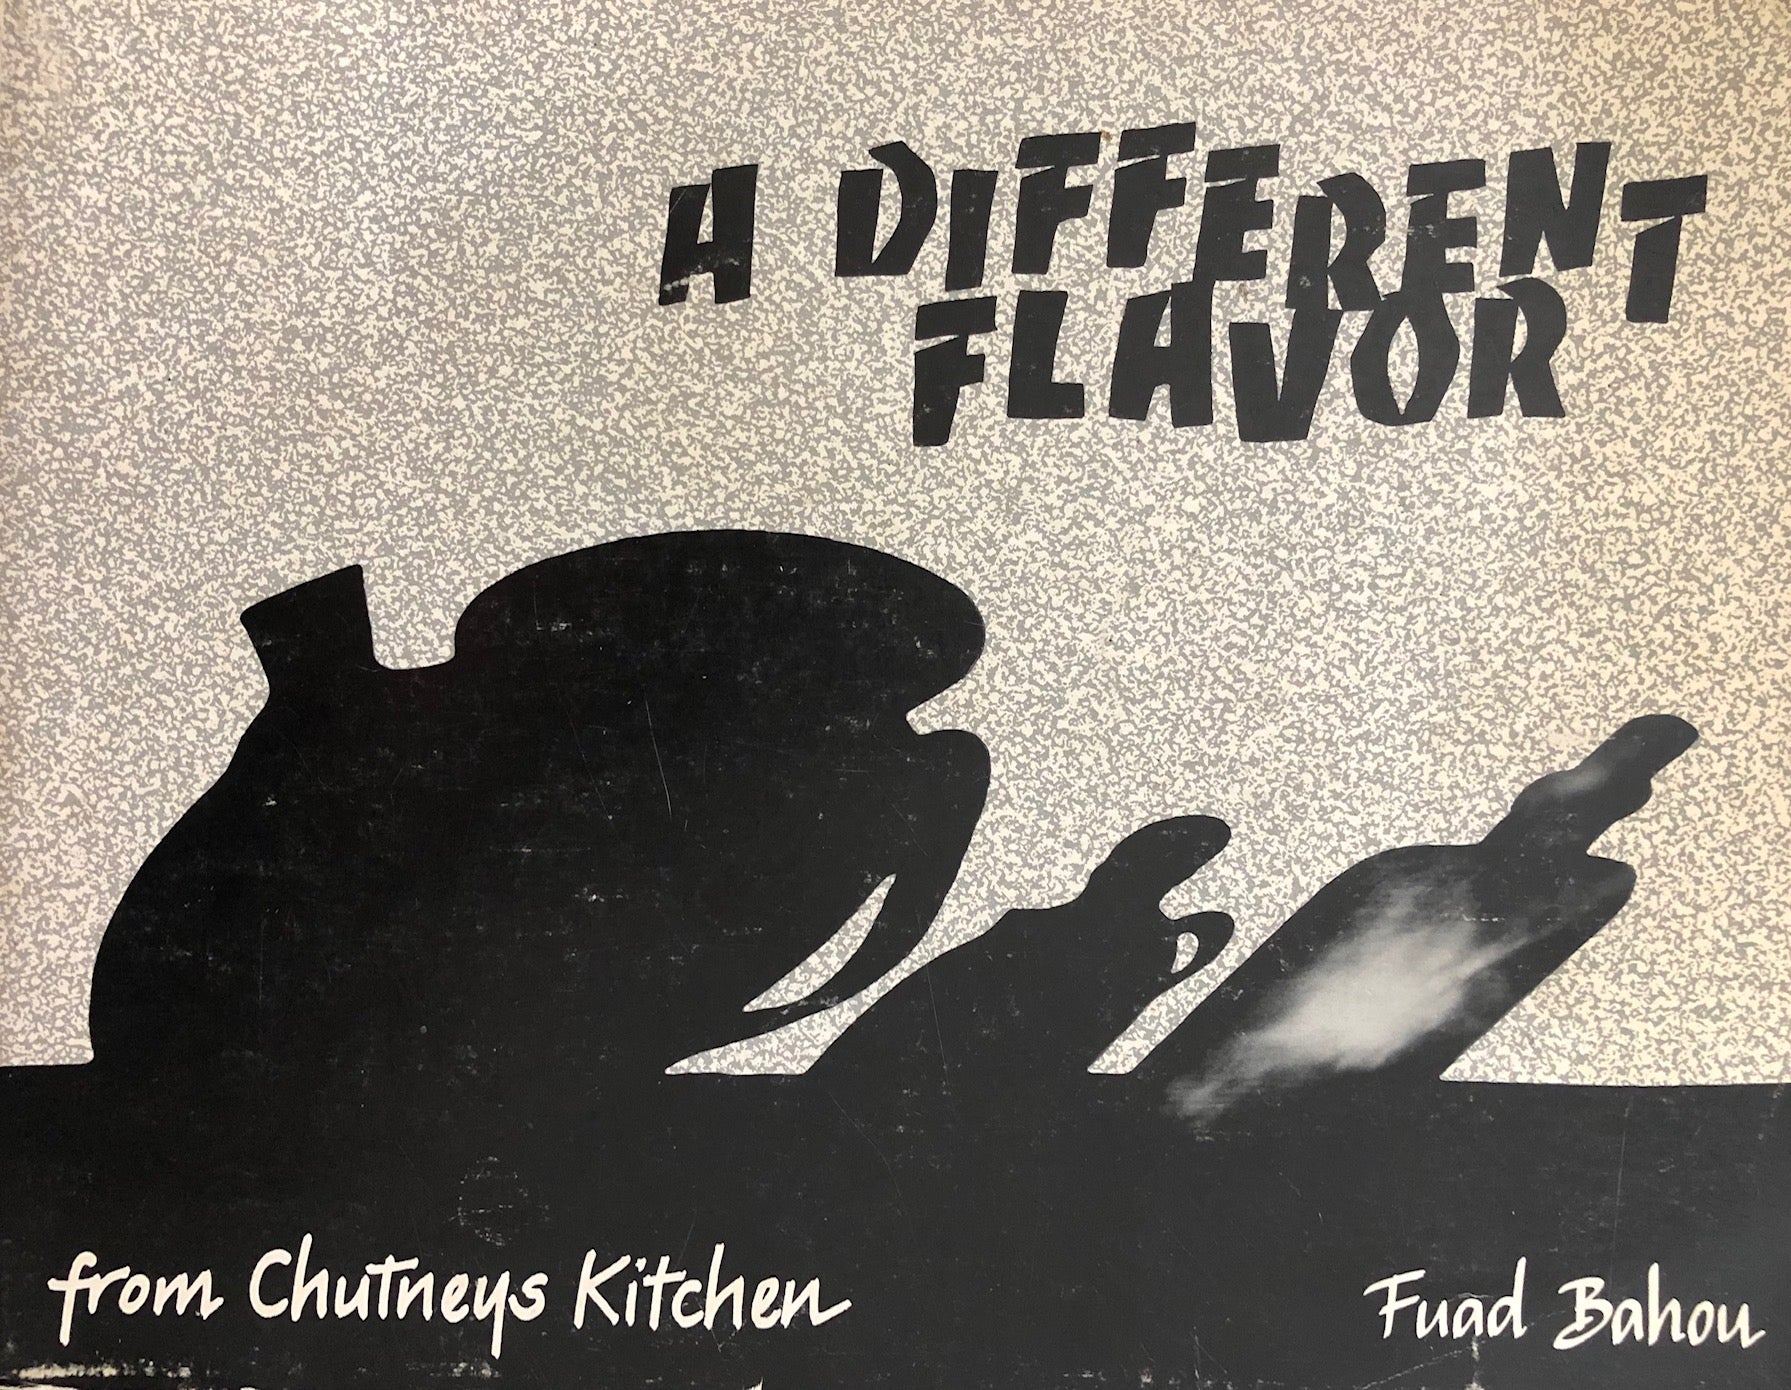 (California - Carmel) Fuad Bahou. A Different Flavor from Chutneys Kitchen.